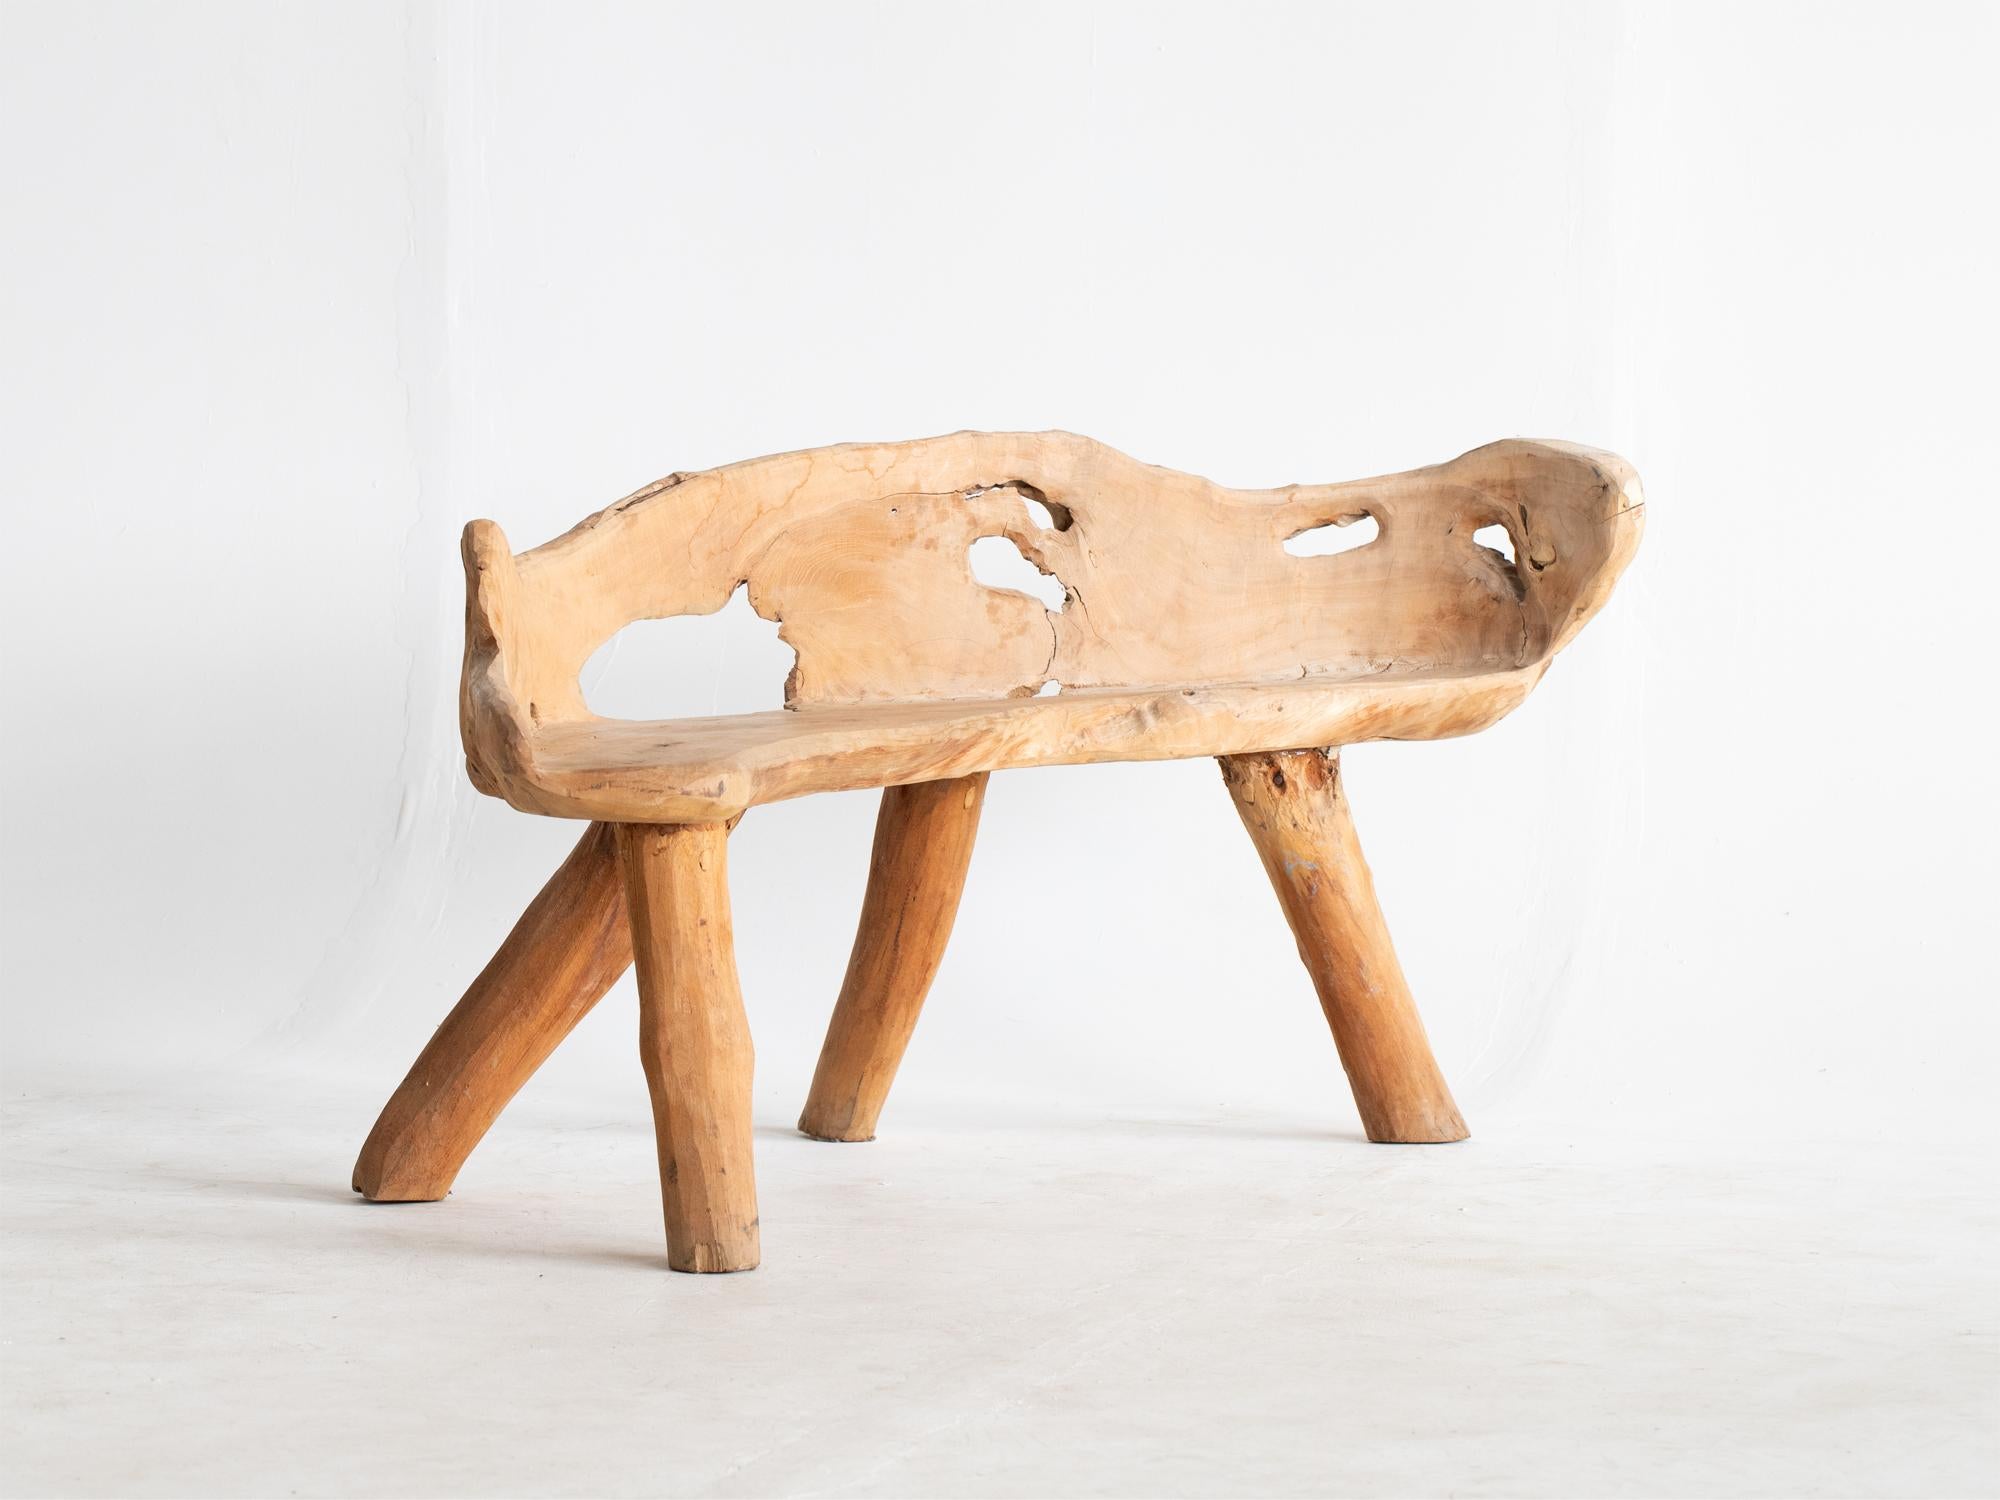 A primitive teak root bench, mid 20C.

In good sturdy order. Also suitable for interior use.

63.5 x 132 x 50 cm (25 x 52.0 x 19.7 